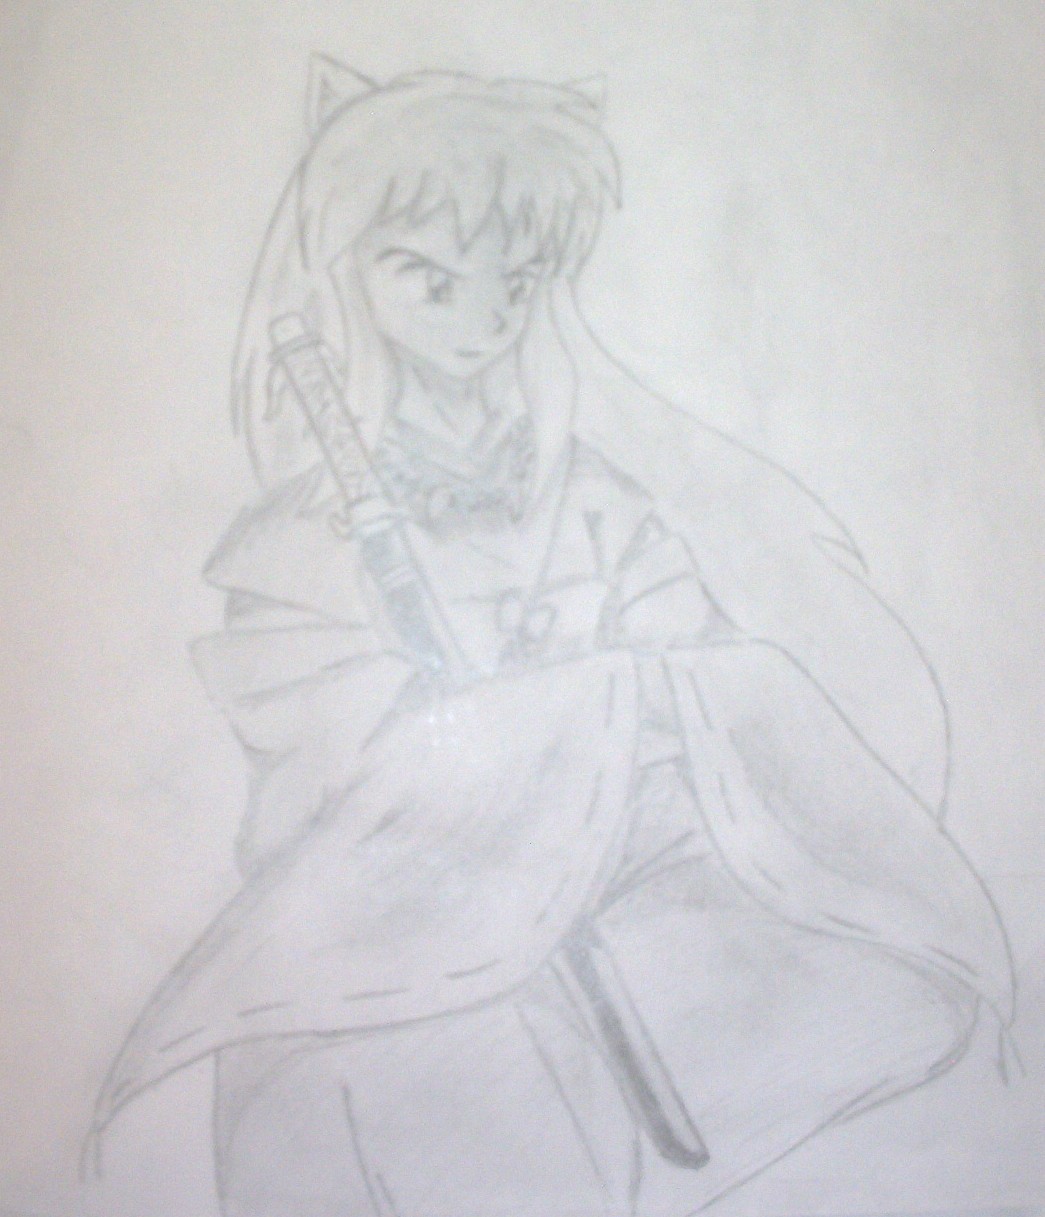 Inuyasha sitting wit his sword by kaname14